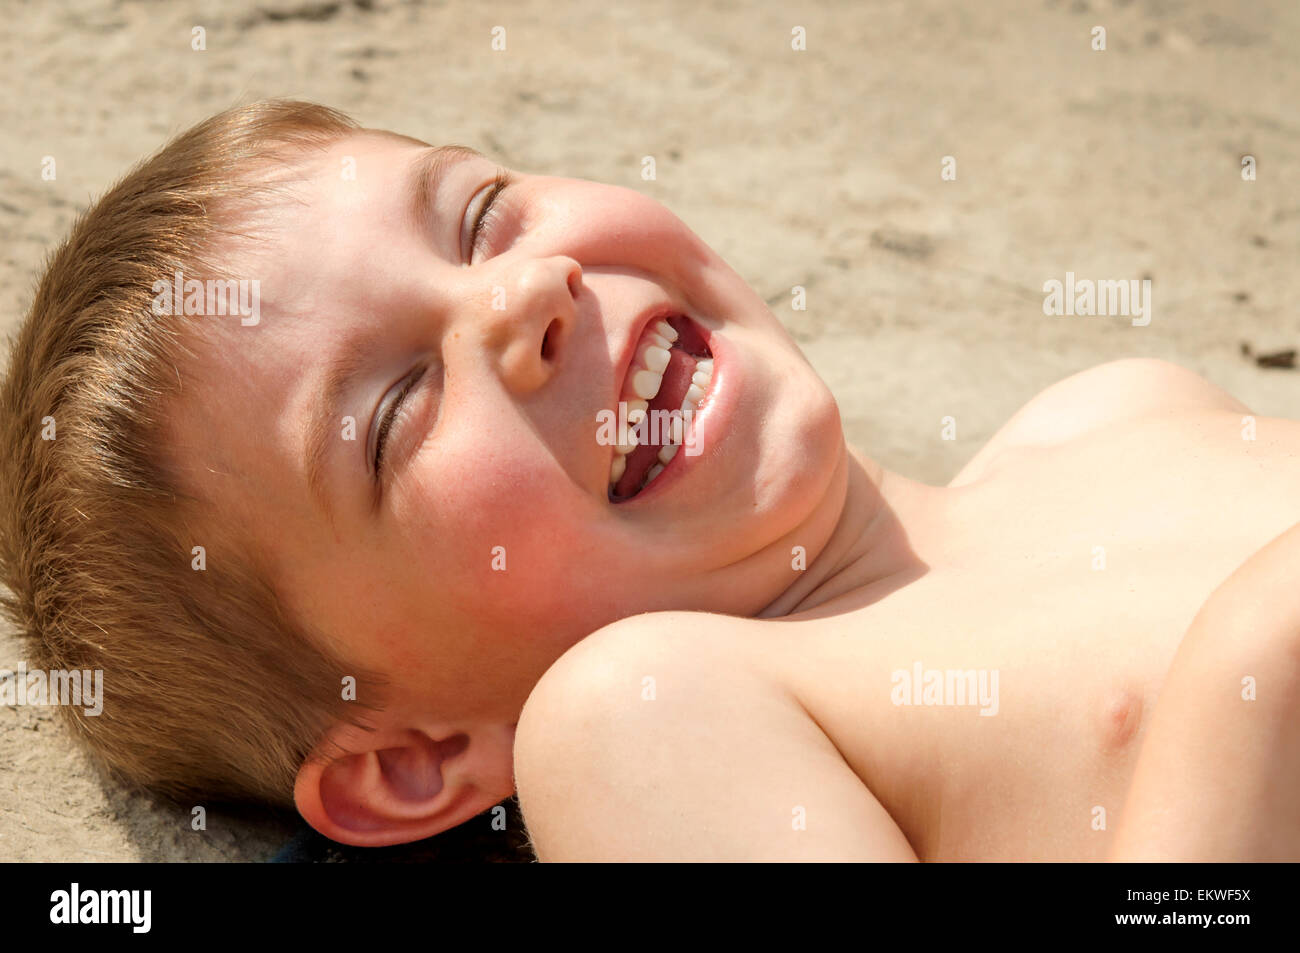 Happy boy giggling in the sand Stock Photo